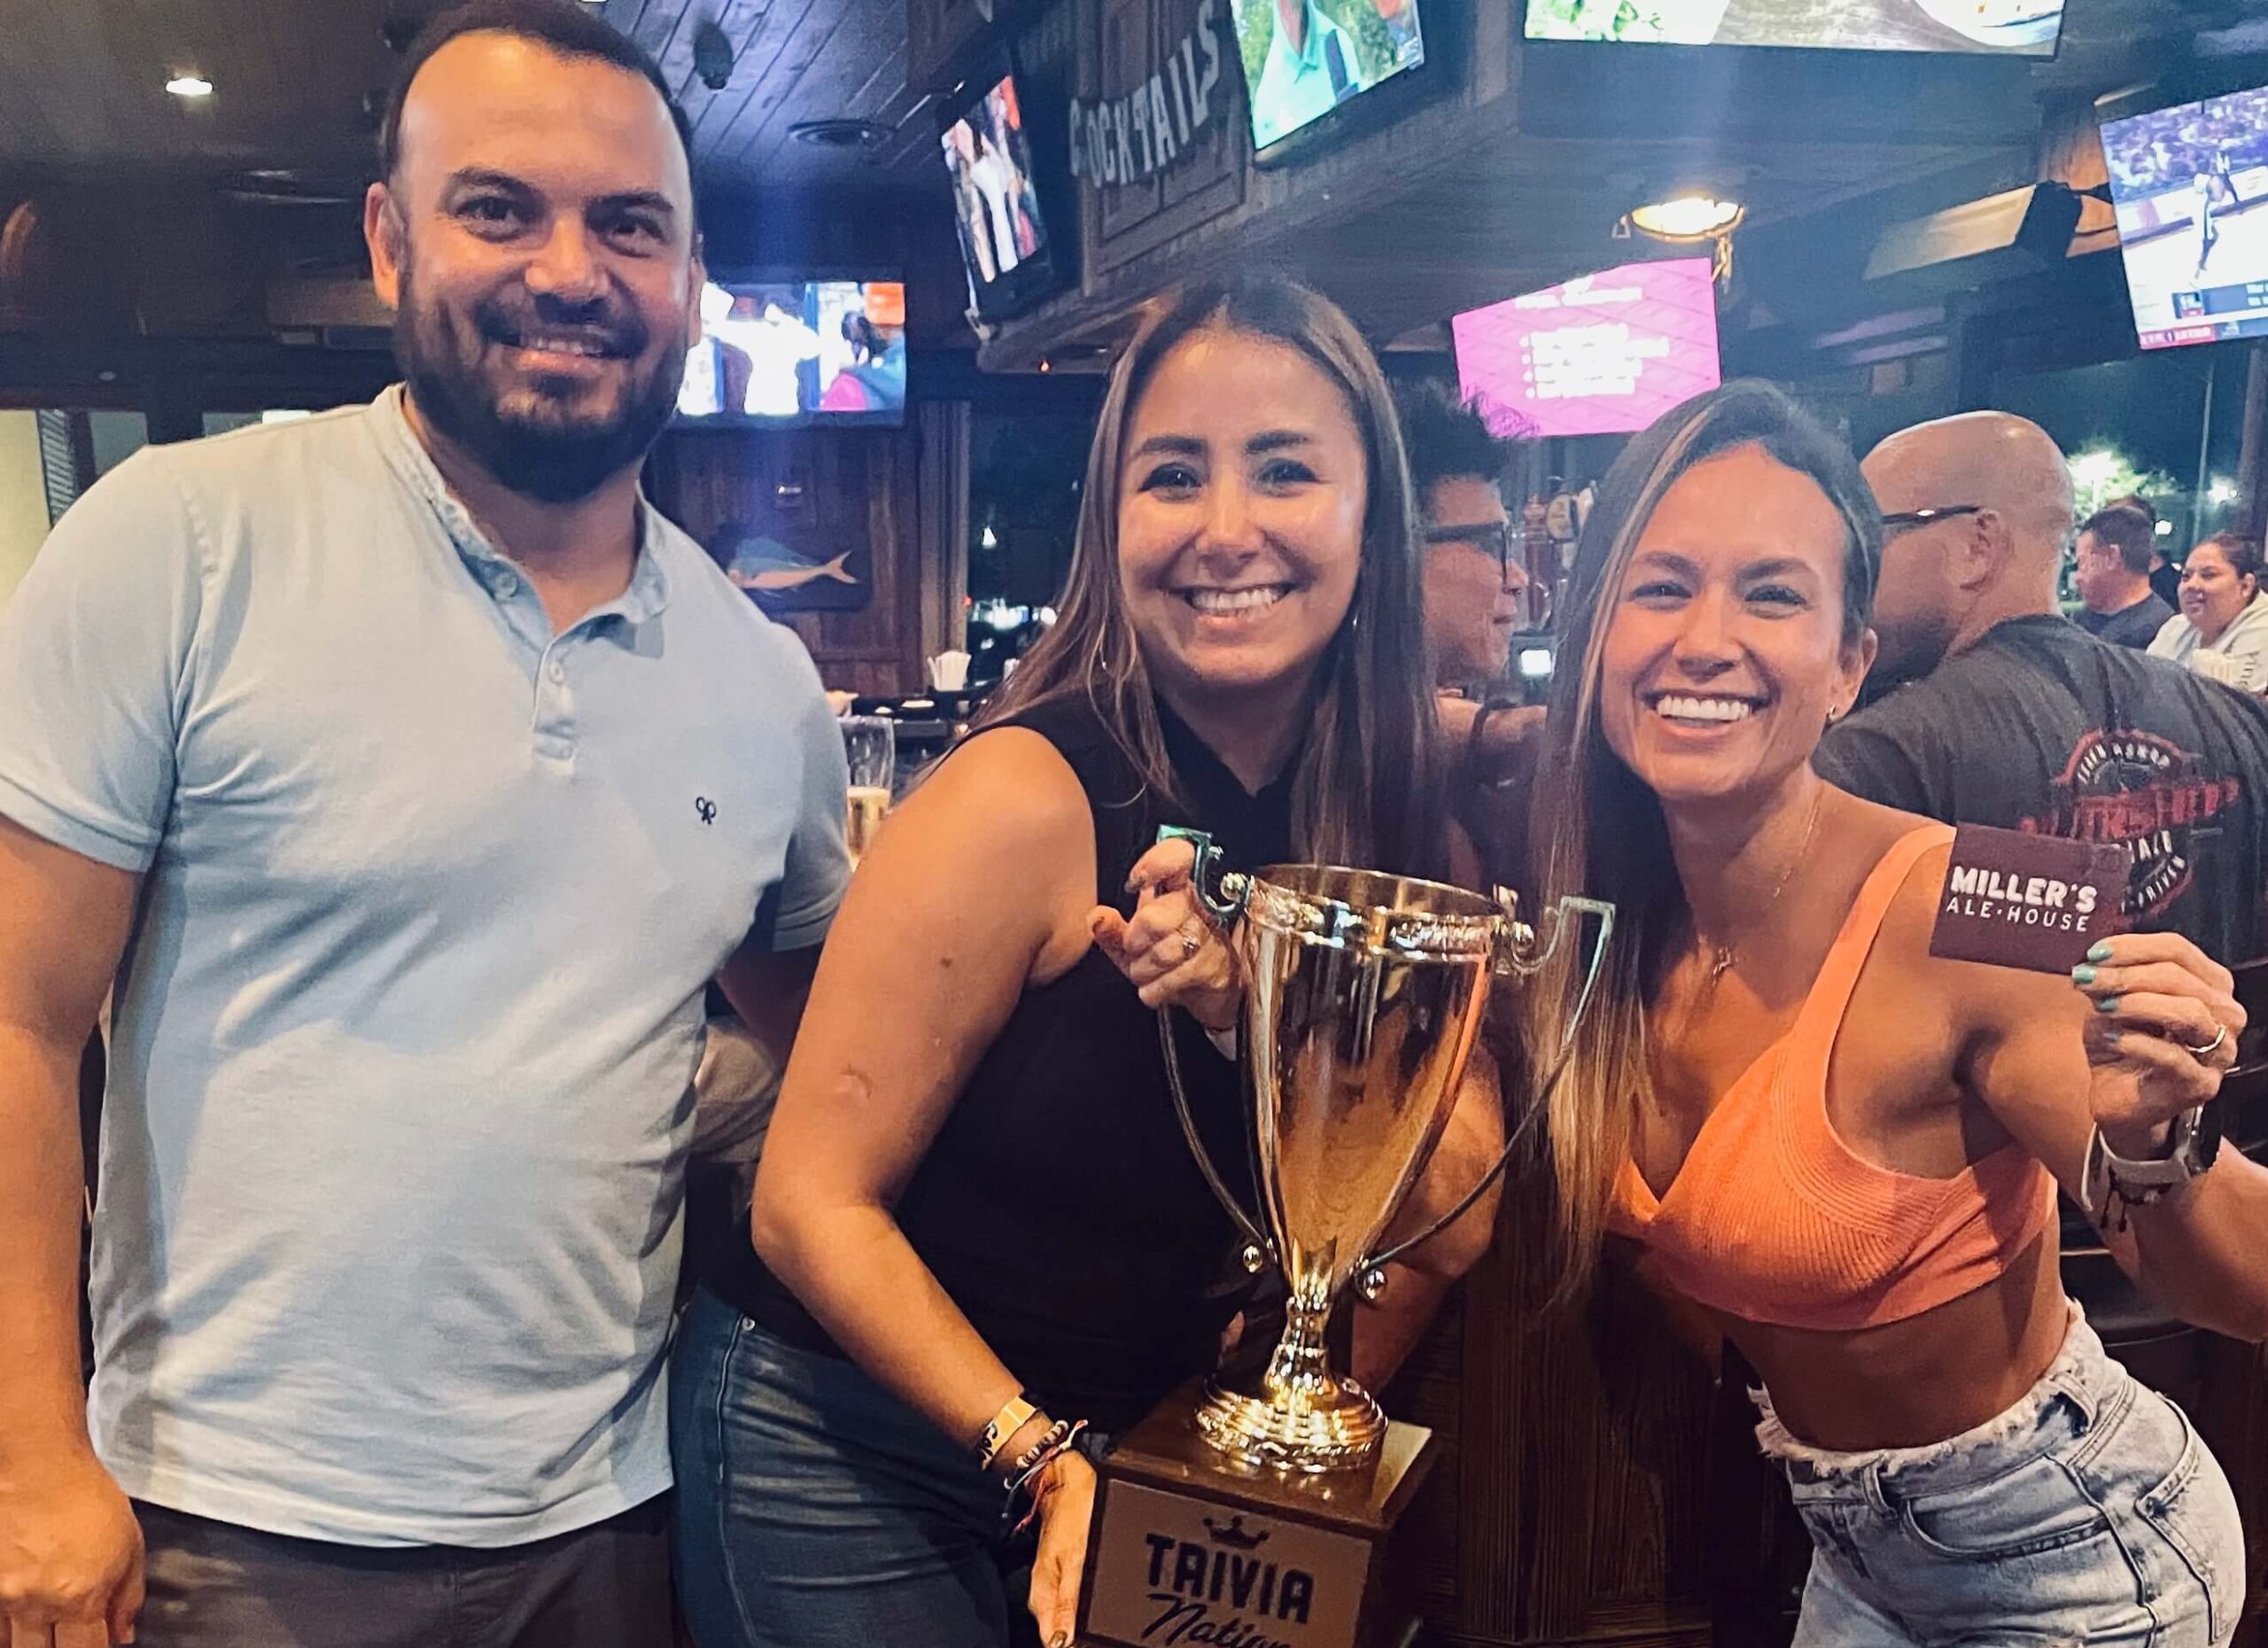 Miller's Ale House Jacksonville FL 32224 trivia night: a man and two women standing together in the restaurant smiling while the women hold up a Trivia Nation trophy and a gift card